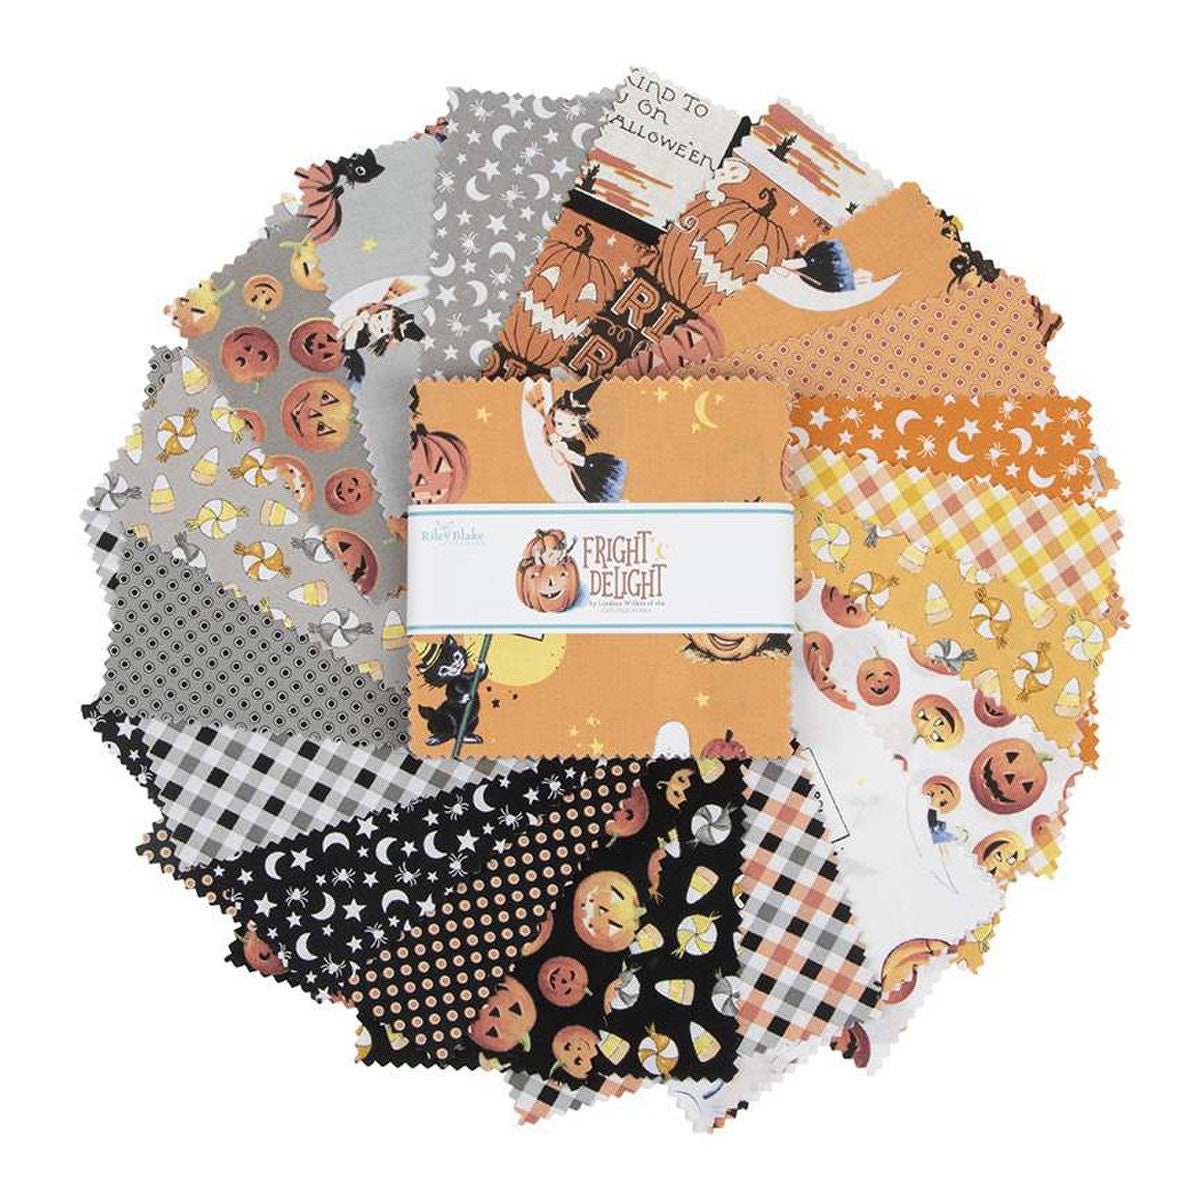 Glow-o-ween Quilt Kit - 40% OFF – Quilt'n'Things